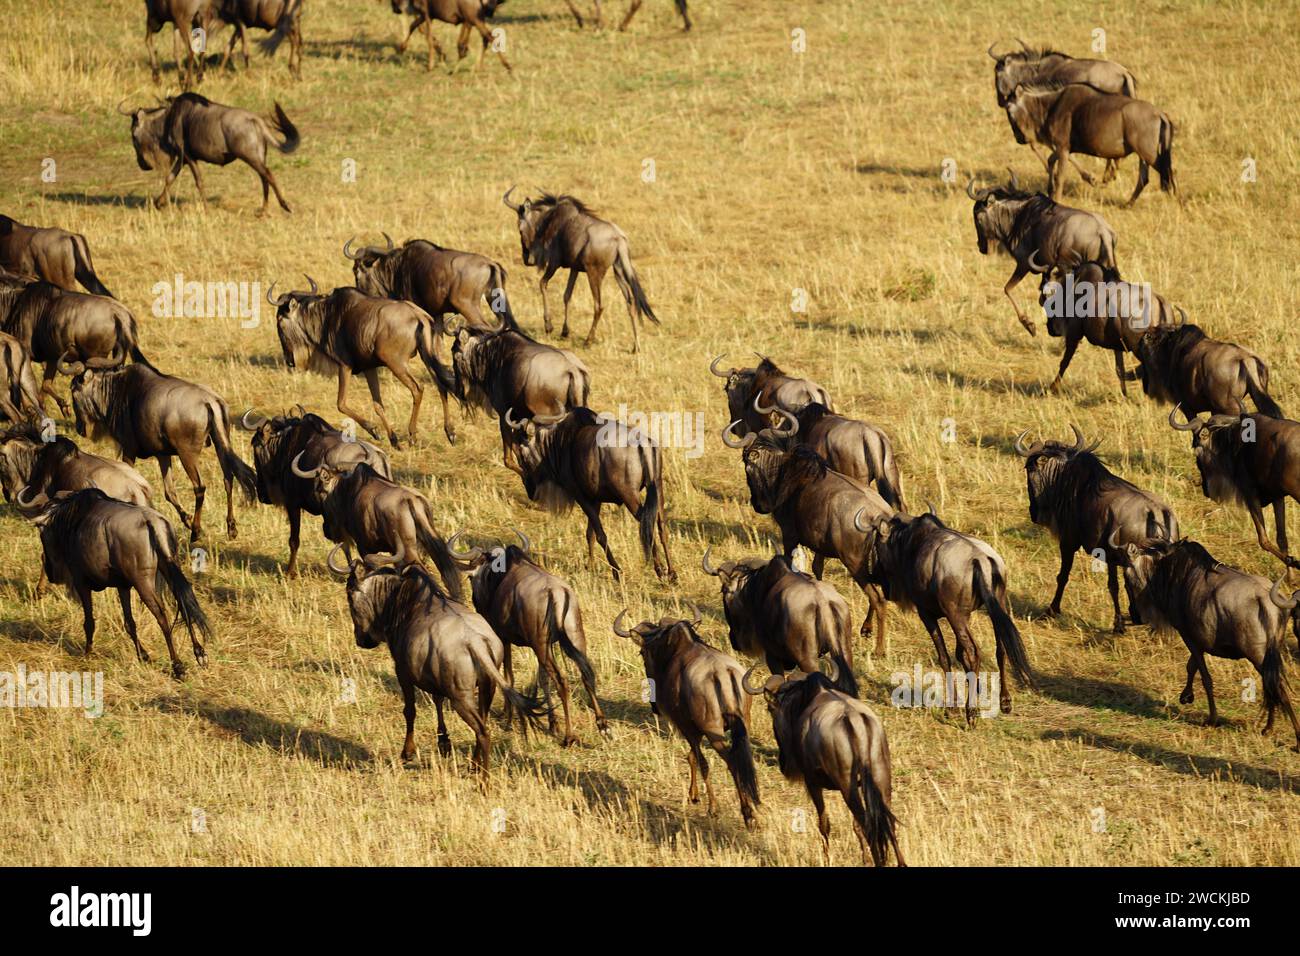 stampede of gnu wildebeest antelopes during great migration in savannah Stock Photo